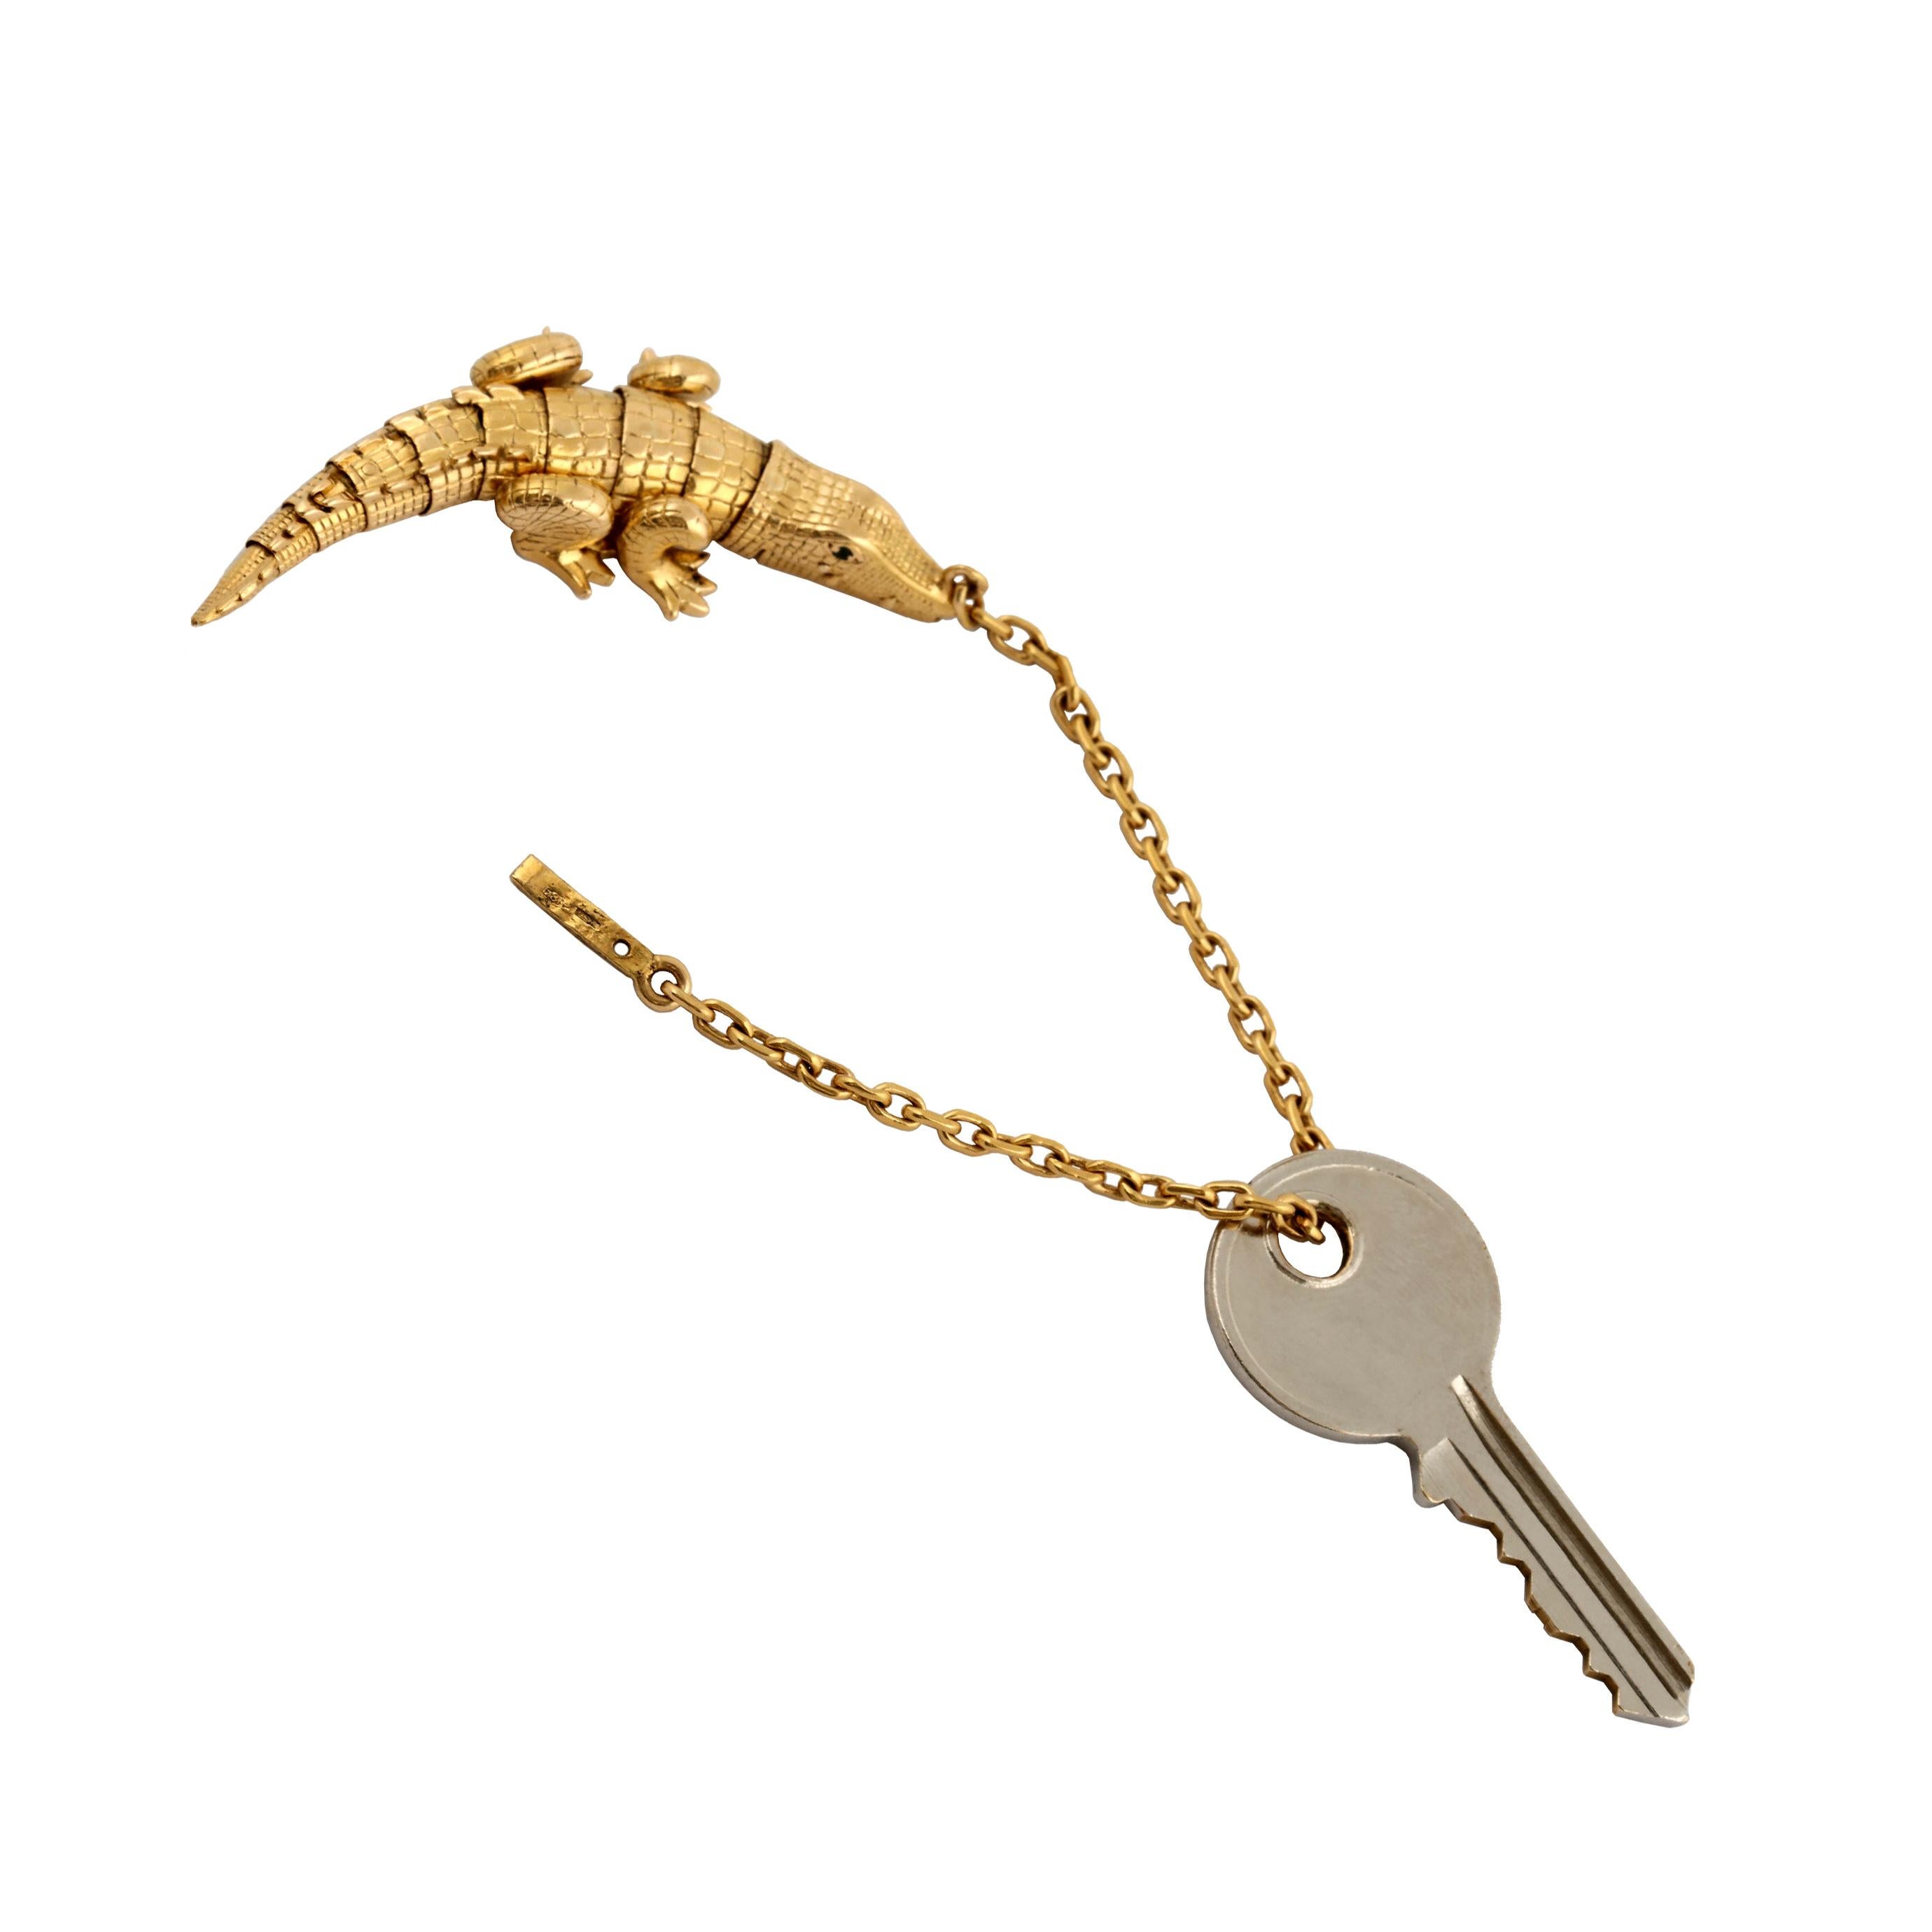  Vintage Tiffany 18k Alligator key chain with tiny emerald eyes.  A very unusual and time-consuming fabrication and design as the body of the Alligator is fully articulated with eleven separate, moveable elements.  Pull the chain through to the